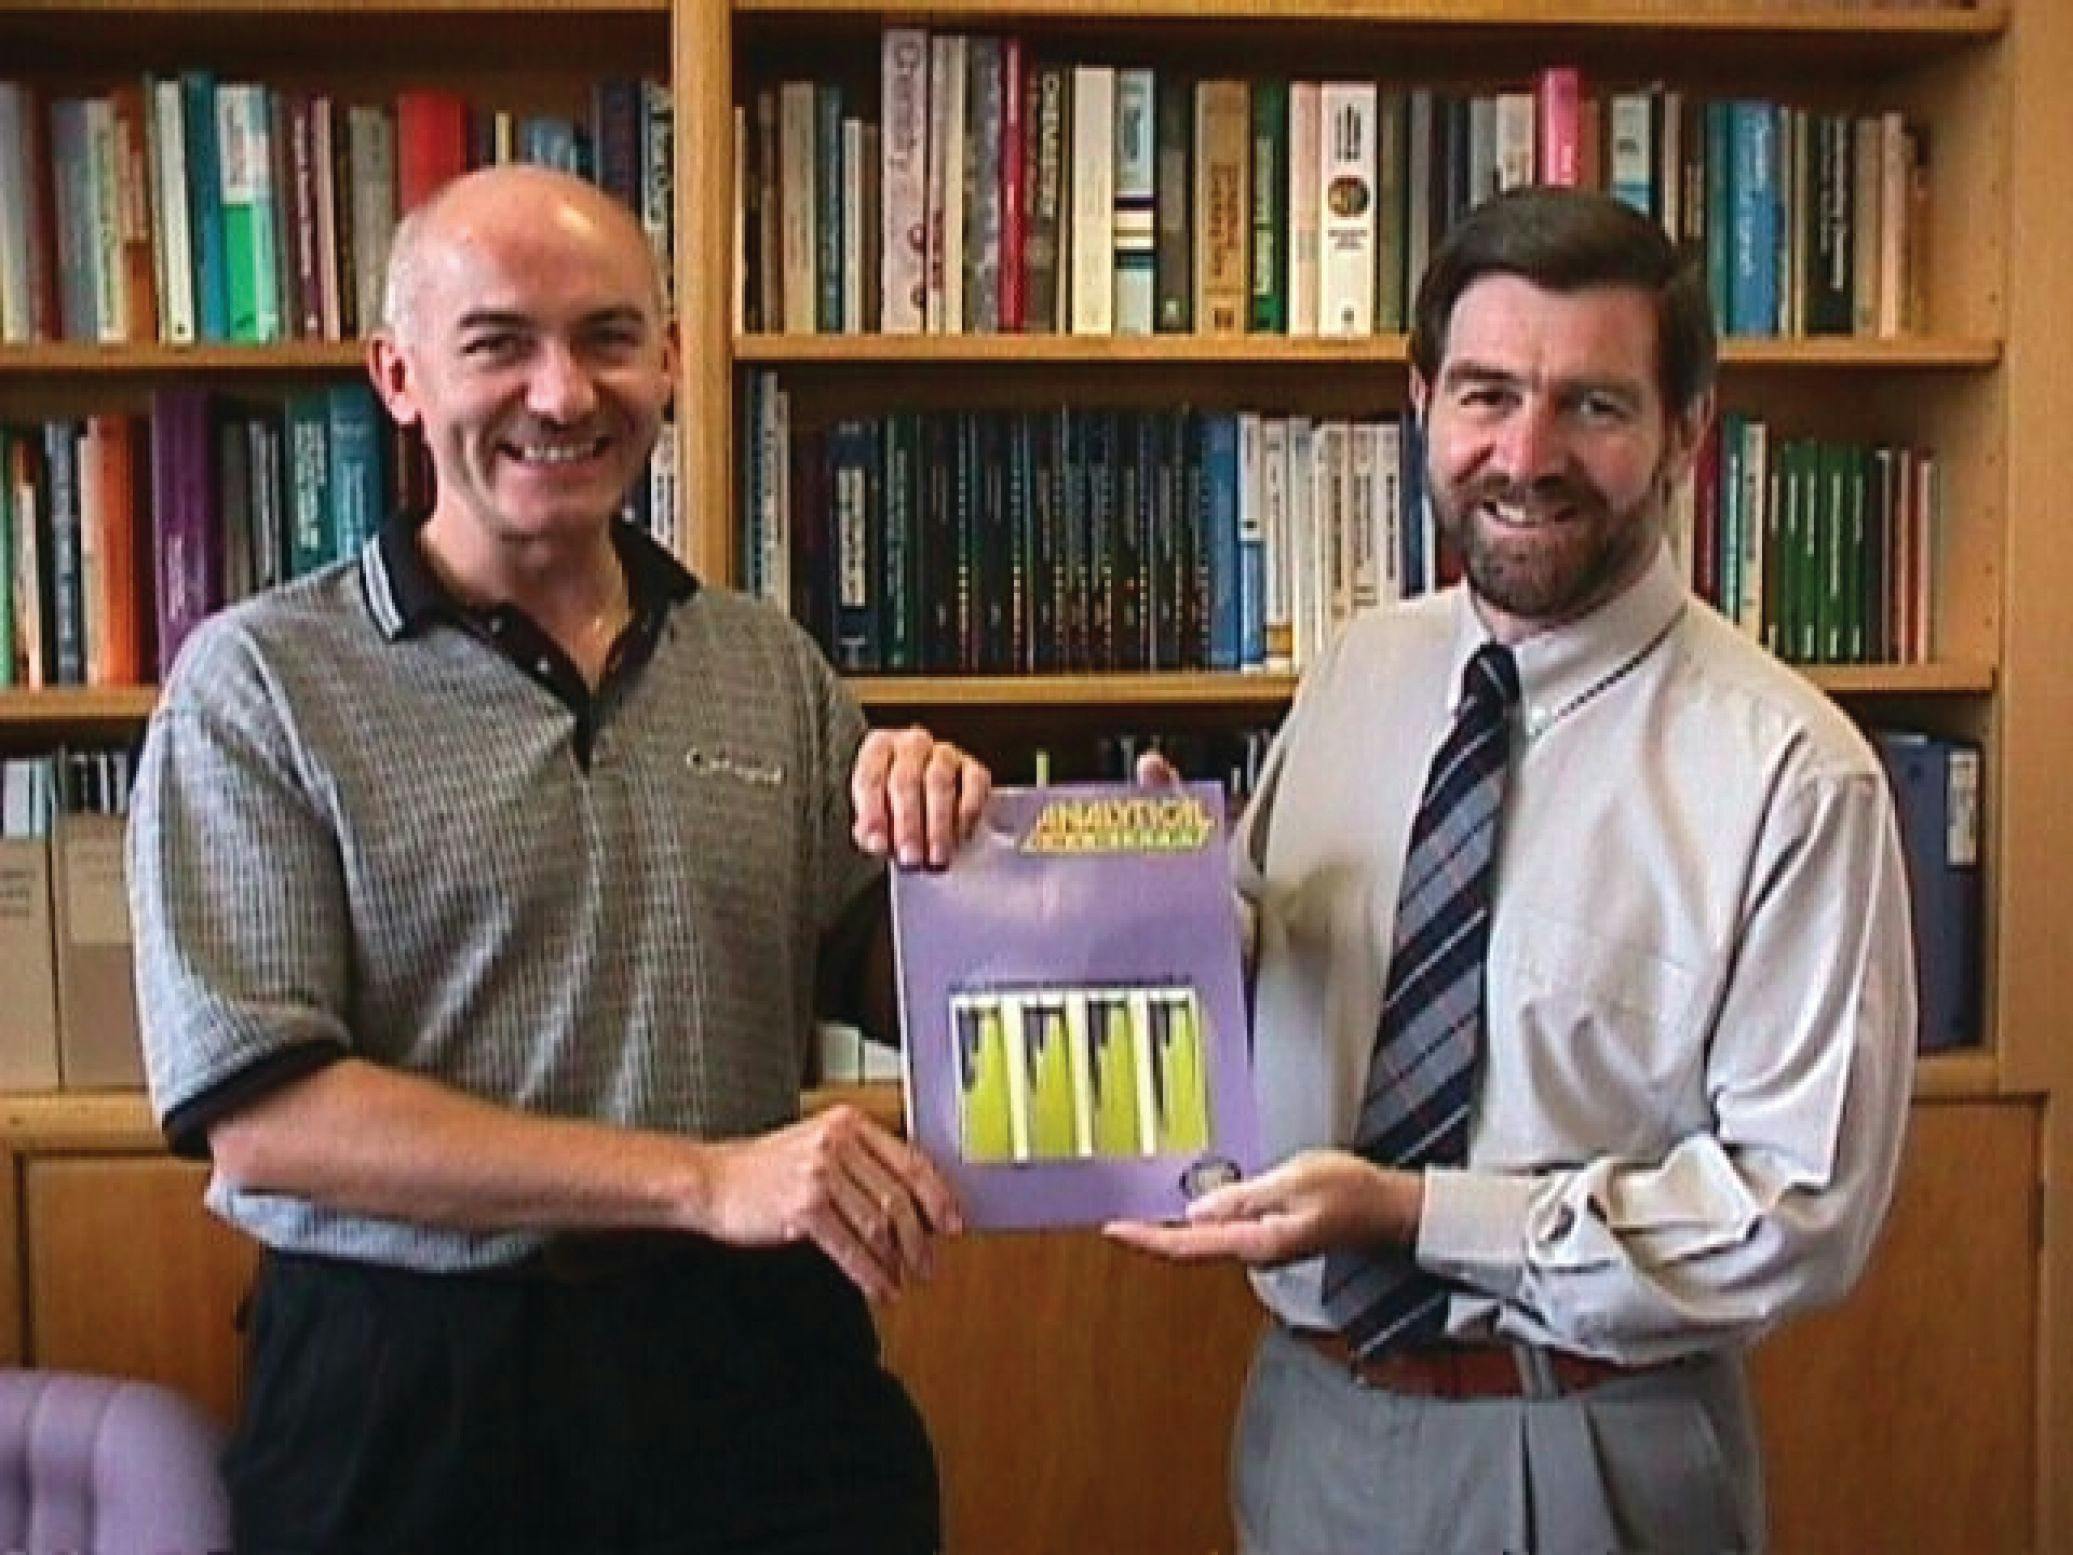 (L to R) Mirek Macka and Paul Haddad celebrating a cover image for an Analytical Chemistry feature article in earlier days, from Anal. Chem. 70(4) 743–749 (1998). Image and citation courtesy of Michael Breadmore, originally from ACROSS.